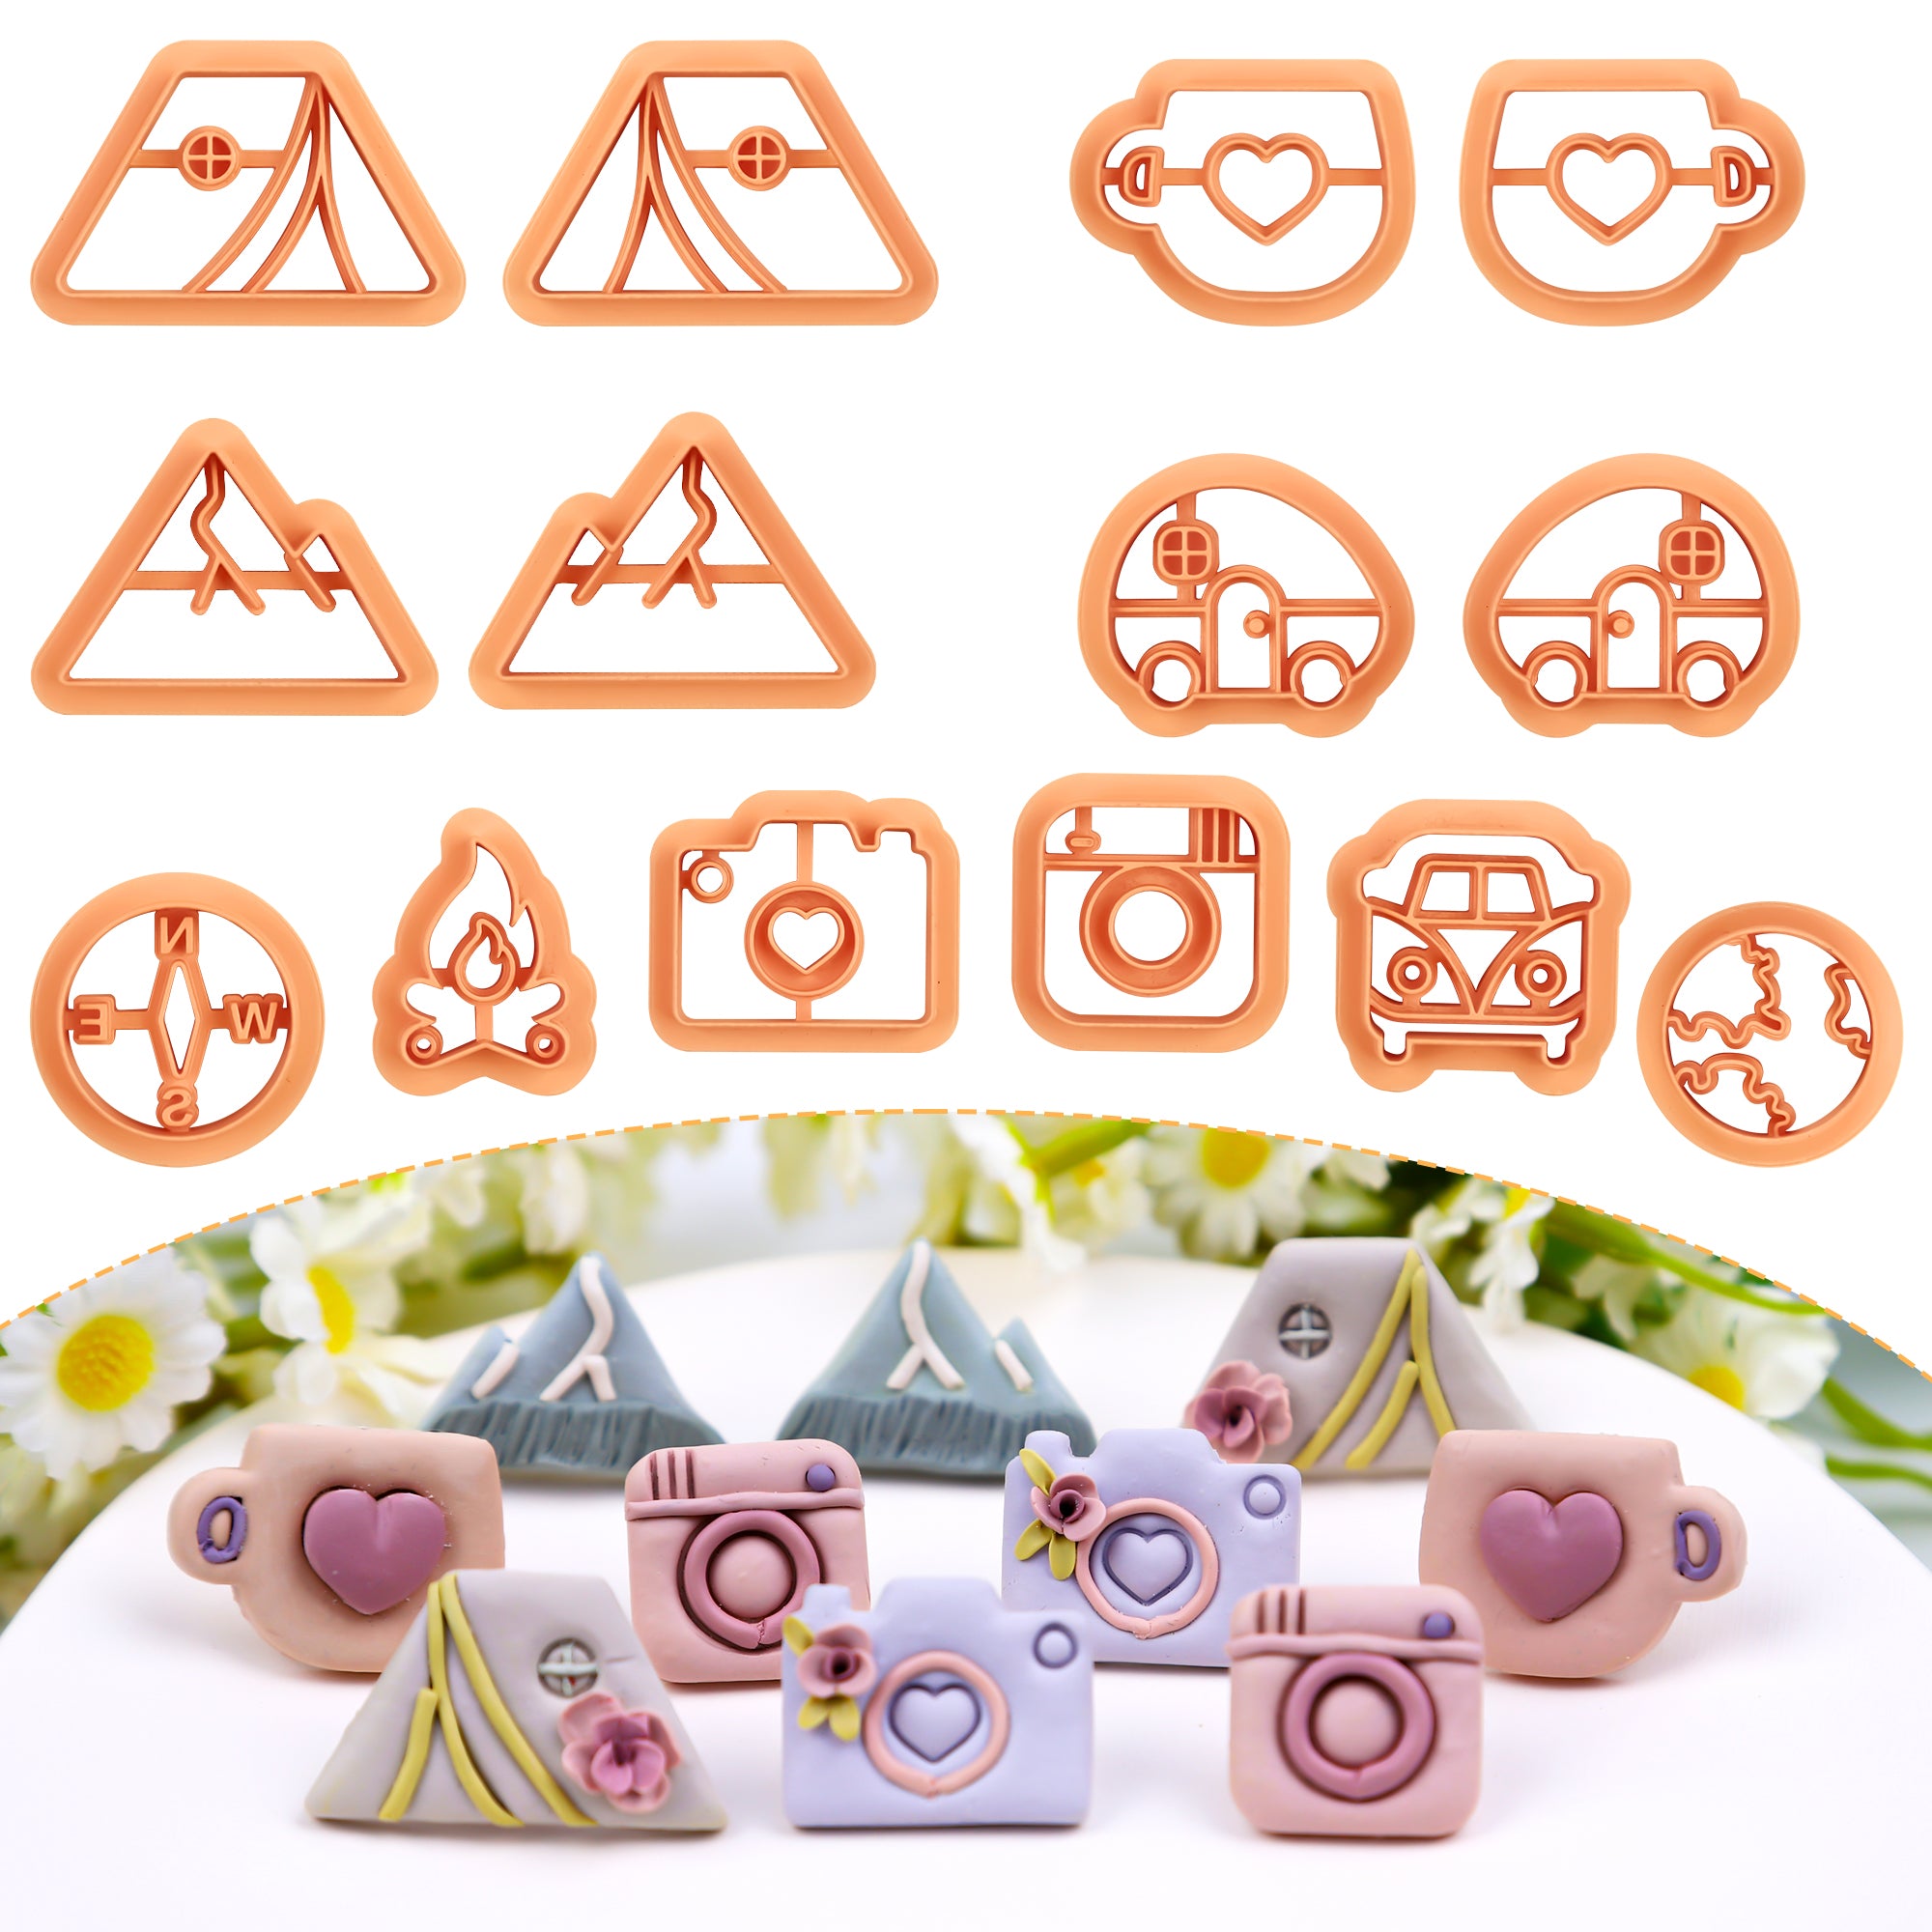 Puocaon Camping Polymer Clay Cuters 14 Pcs